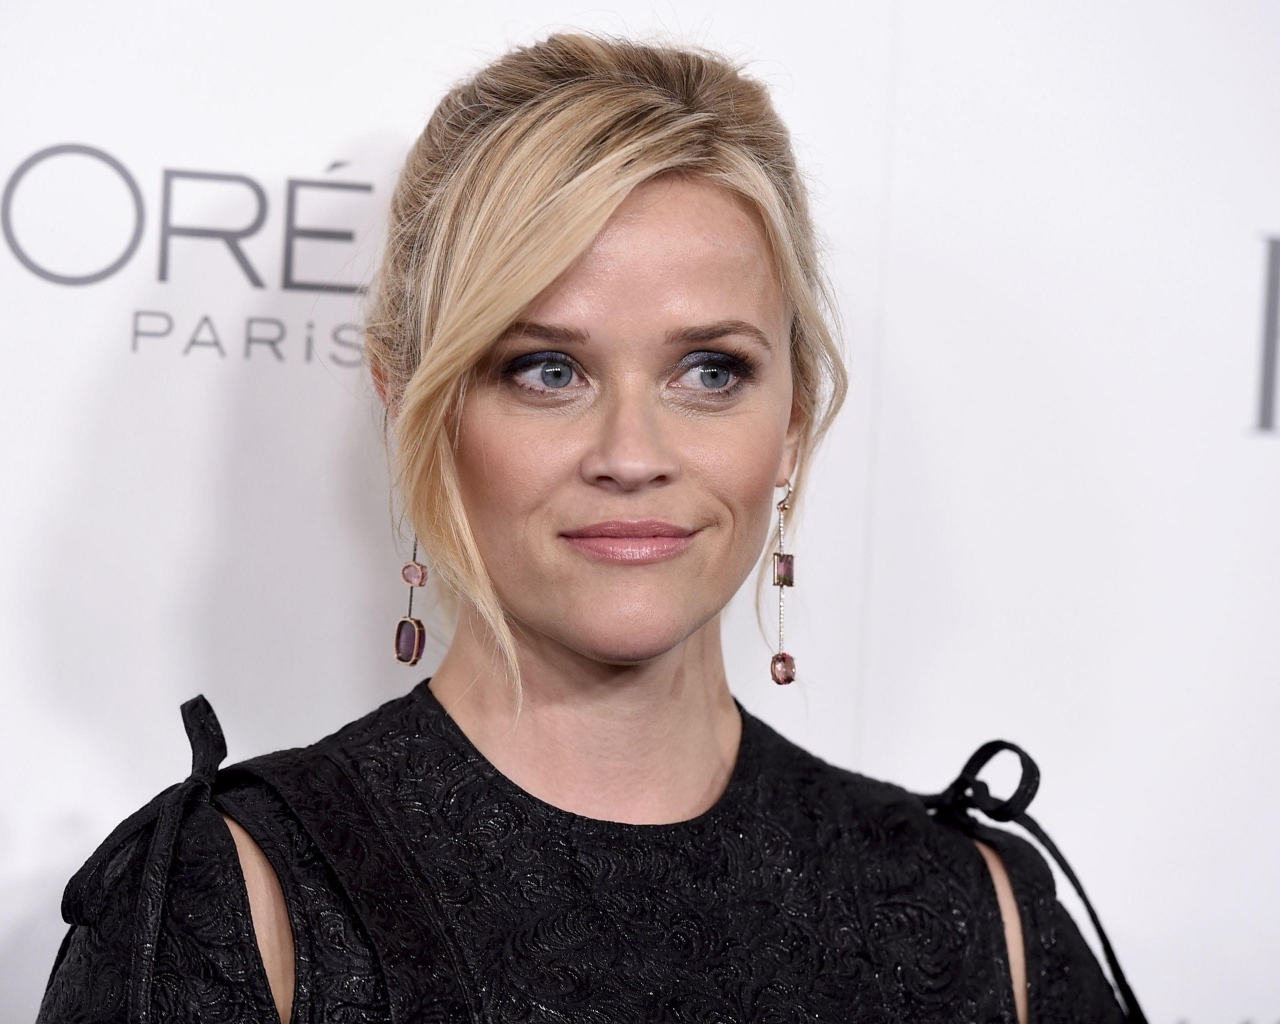 Actress Reese Witherspoon in a black dress against a wall